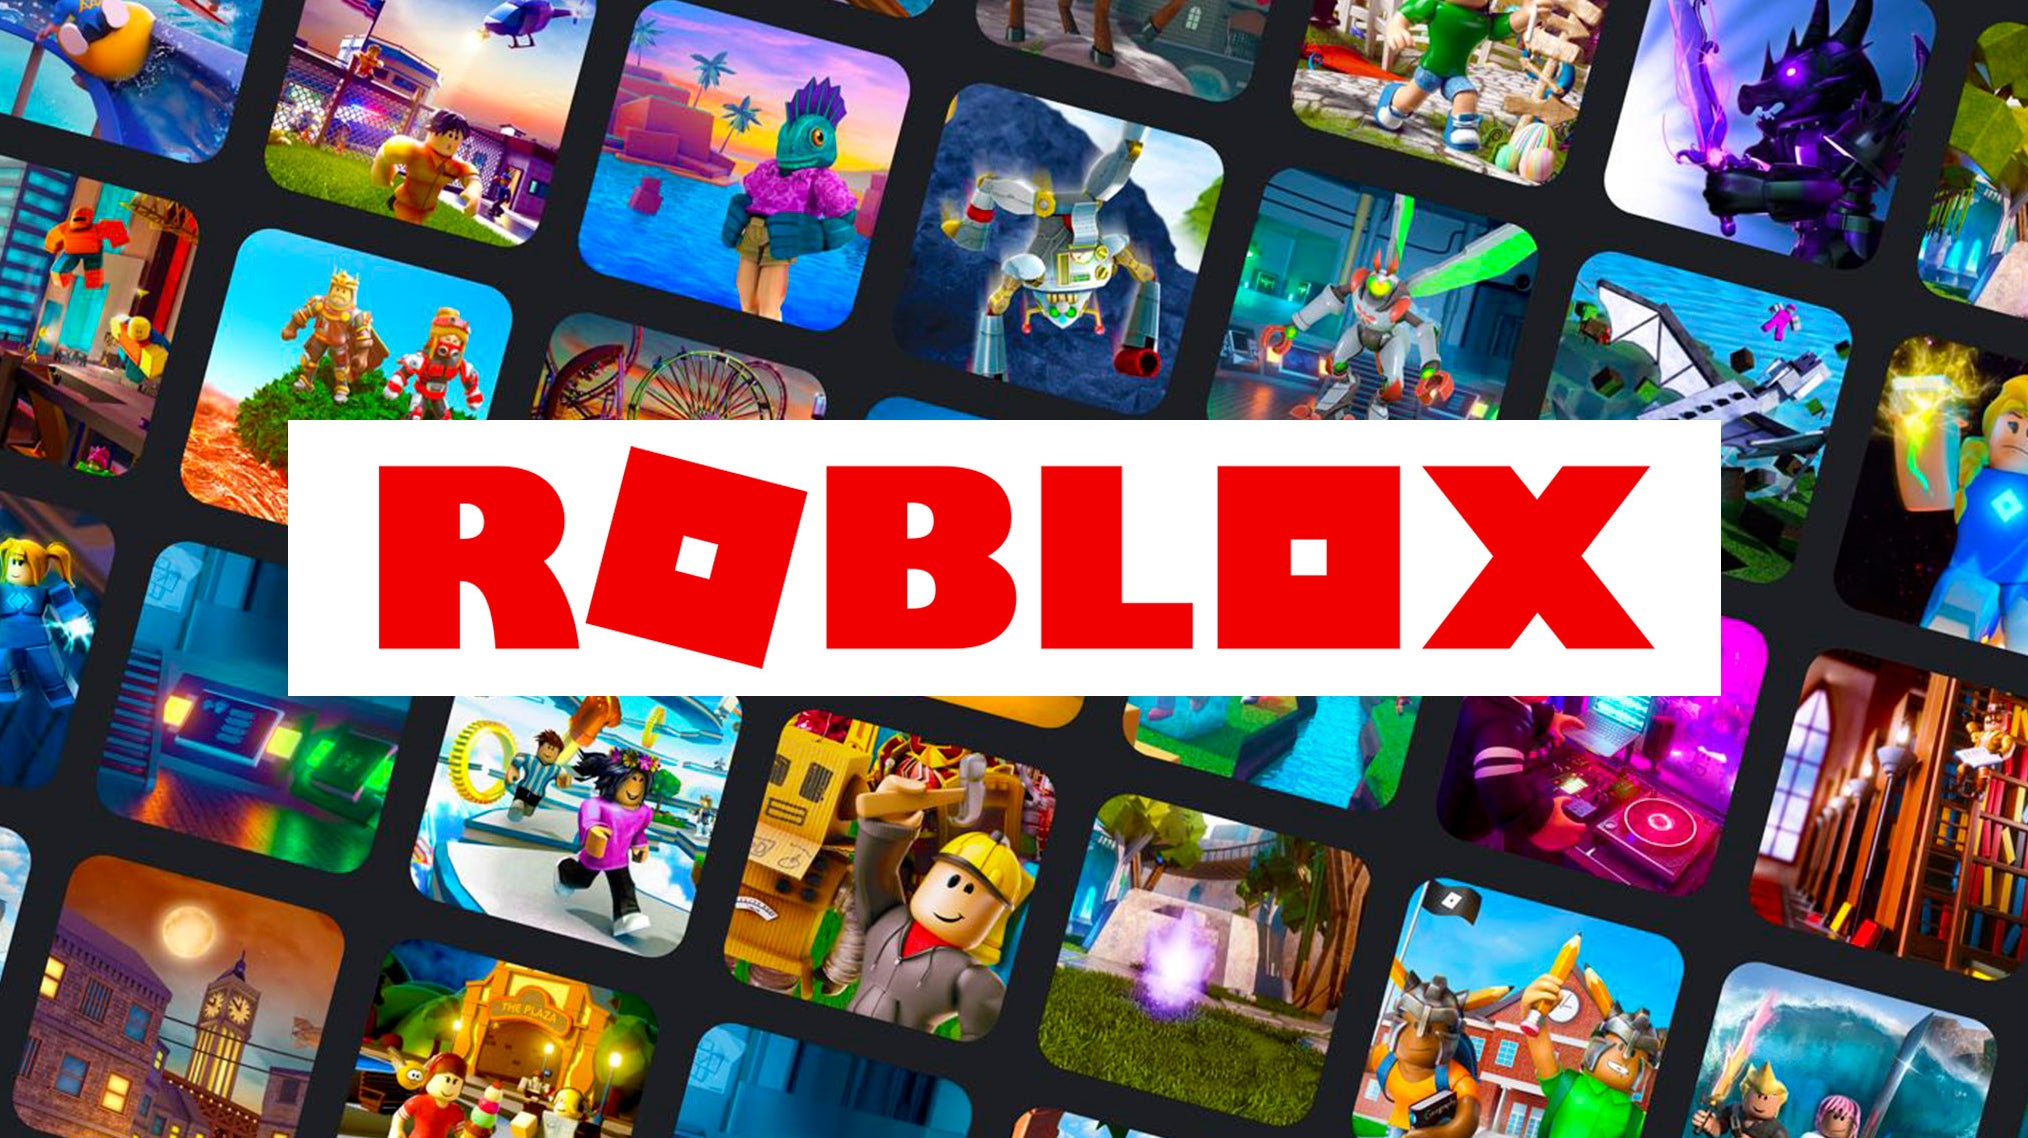 Image for Roblox accused of being an unsafe environment for children